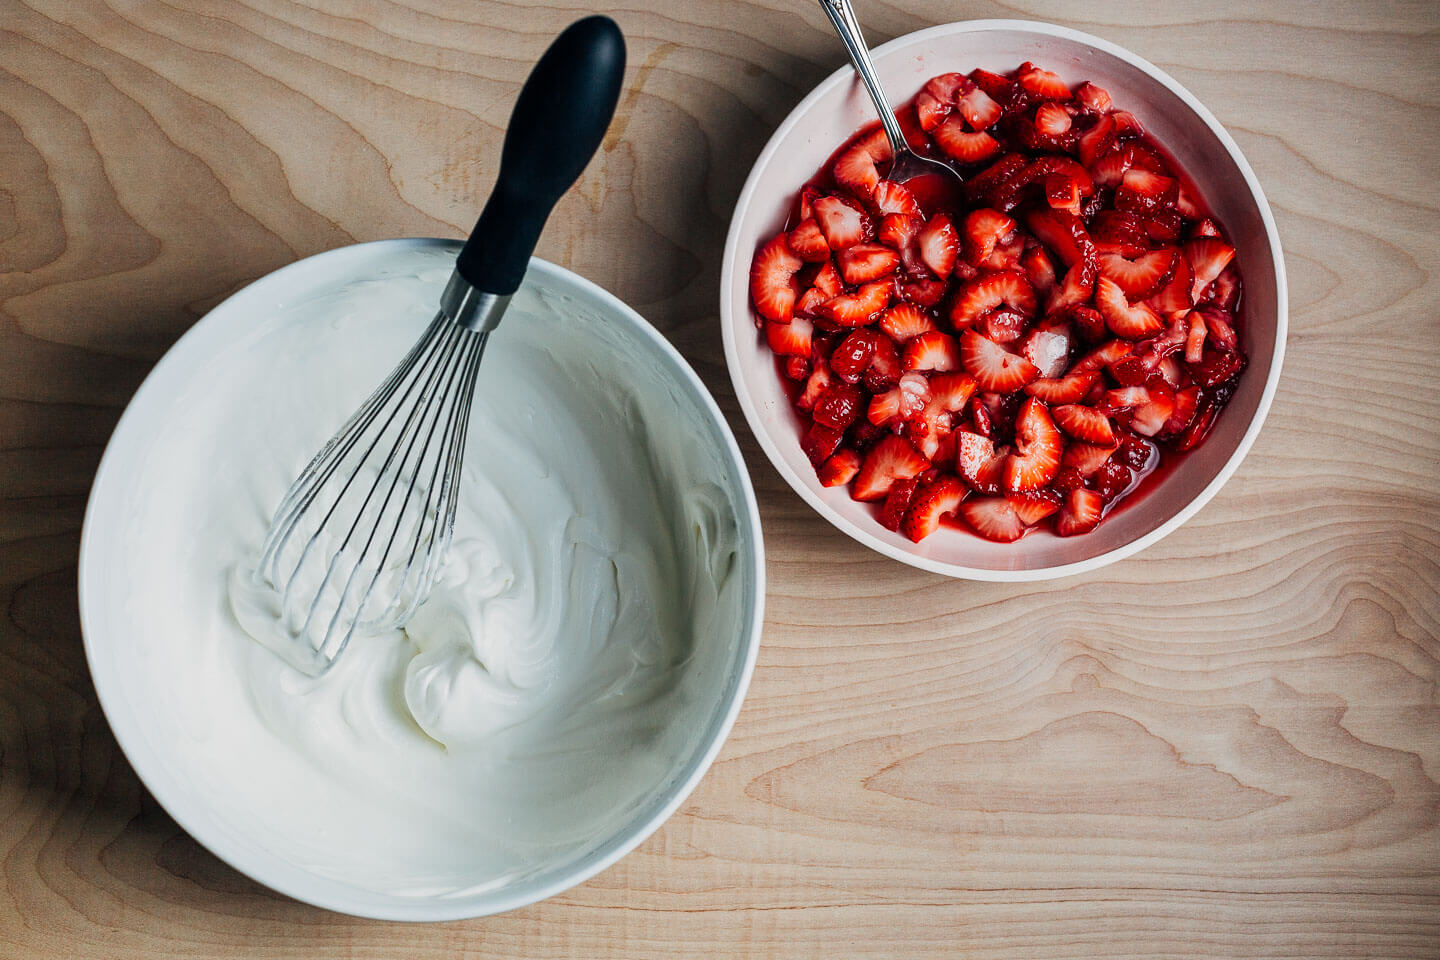 A bowl of whipped cream alongside a bowl of strawberries